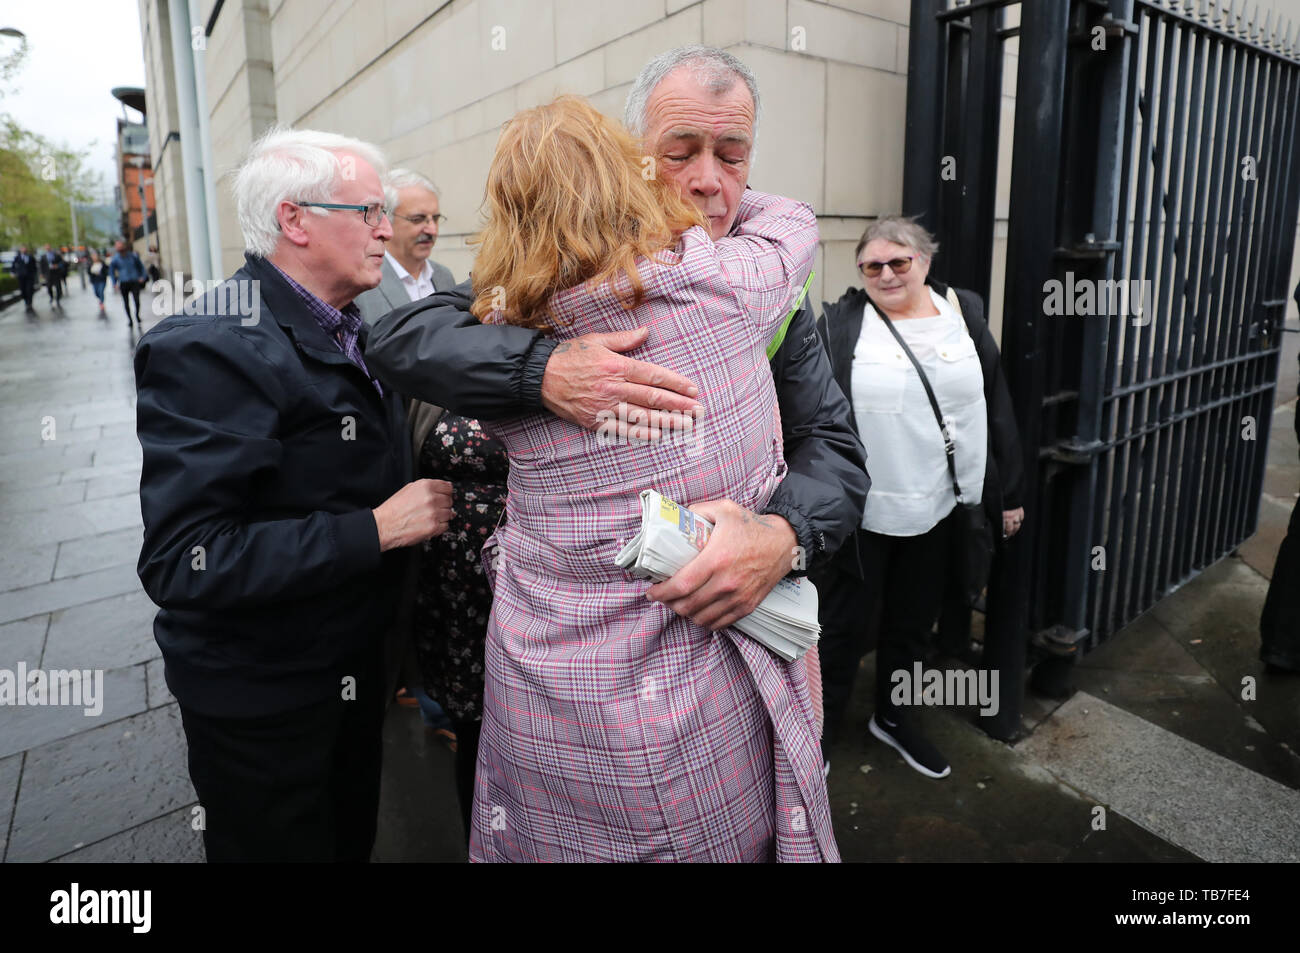 Relatives of those who died on Bloody Sunday in Londonderry and in Ballymurphy embrace each other as they enter Belfast's Laganside courts where General Sir Mike Jackson is due to give evidence to the inquest examined the deaths of ten people killed in shooting involving the Parachute Regiment in Ballymurphy, west Belfast in 1971. Stock Photo